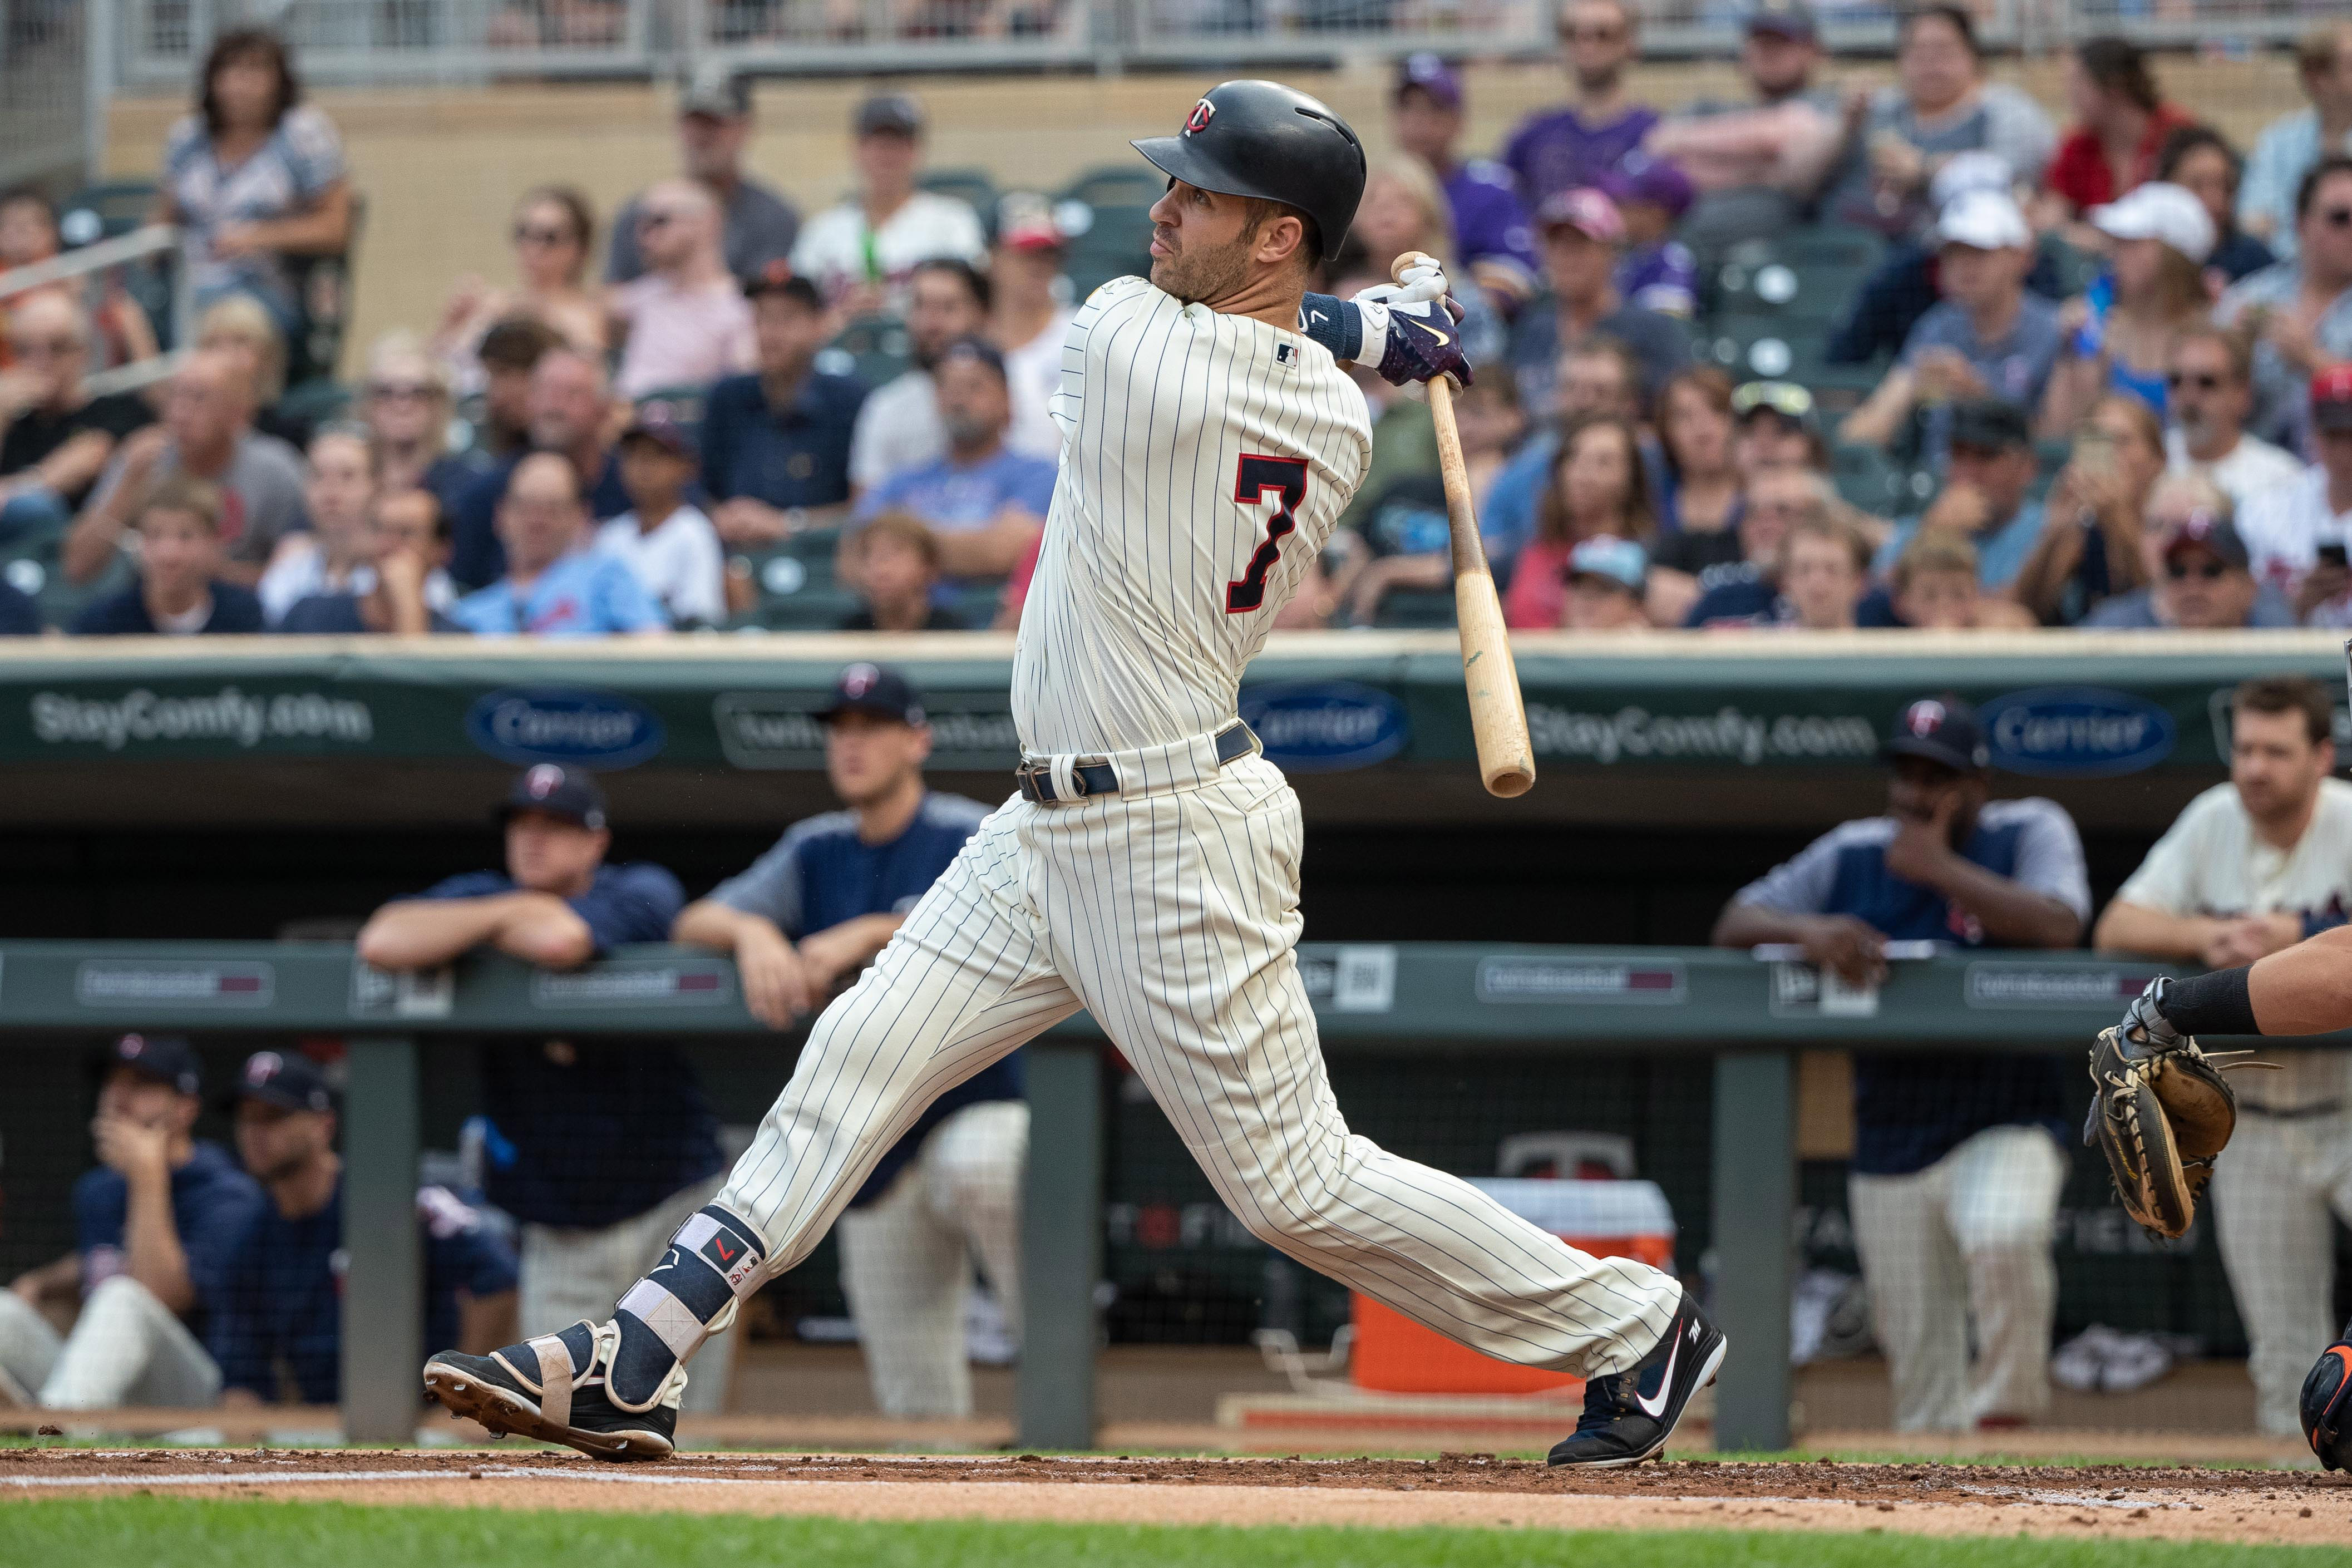 Joe Mauer reflects on career: 'It's been a dream come true' 